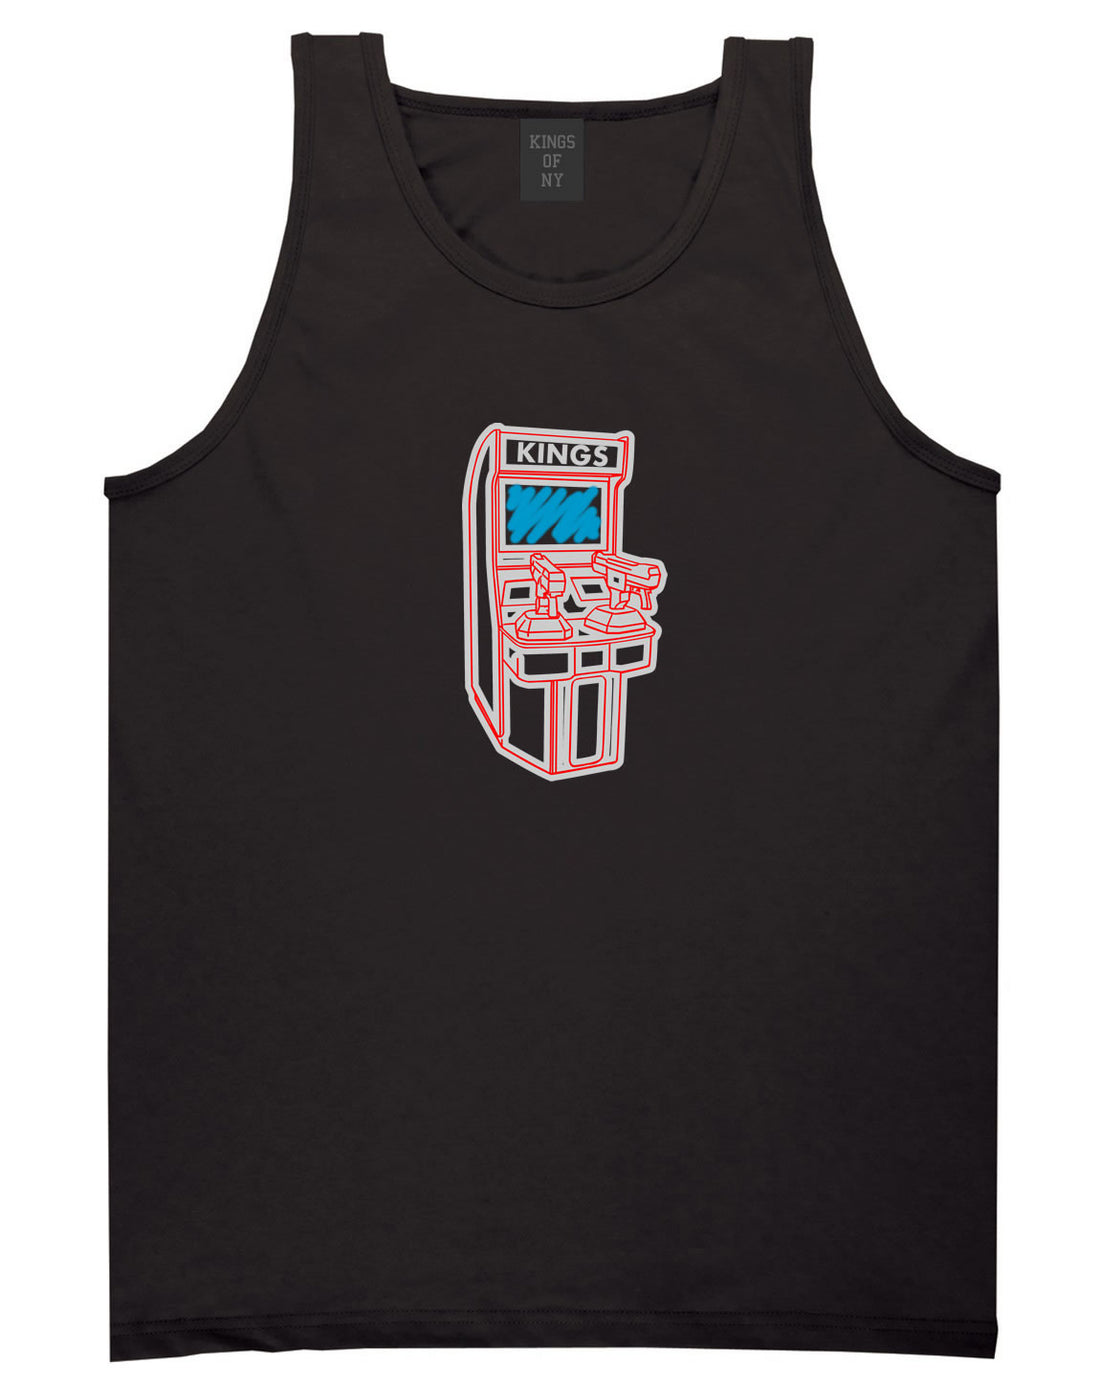 Arcade Game Gamer Tank Top in Black By Kings Of NY